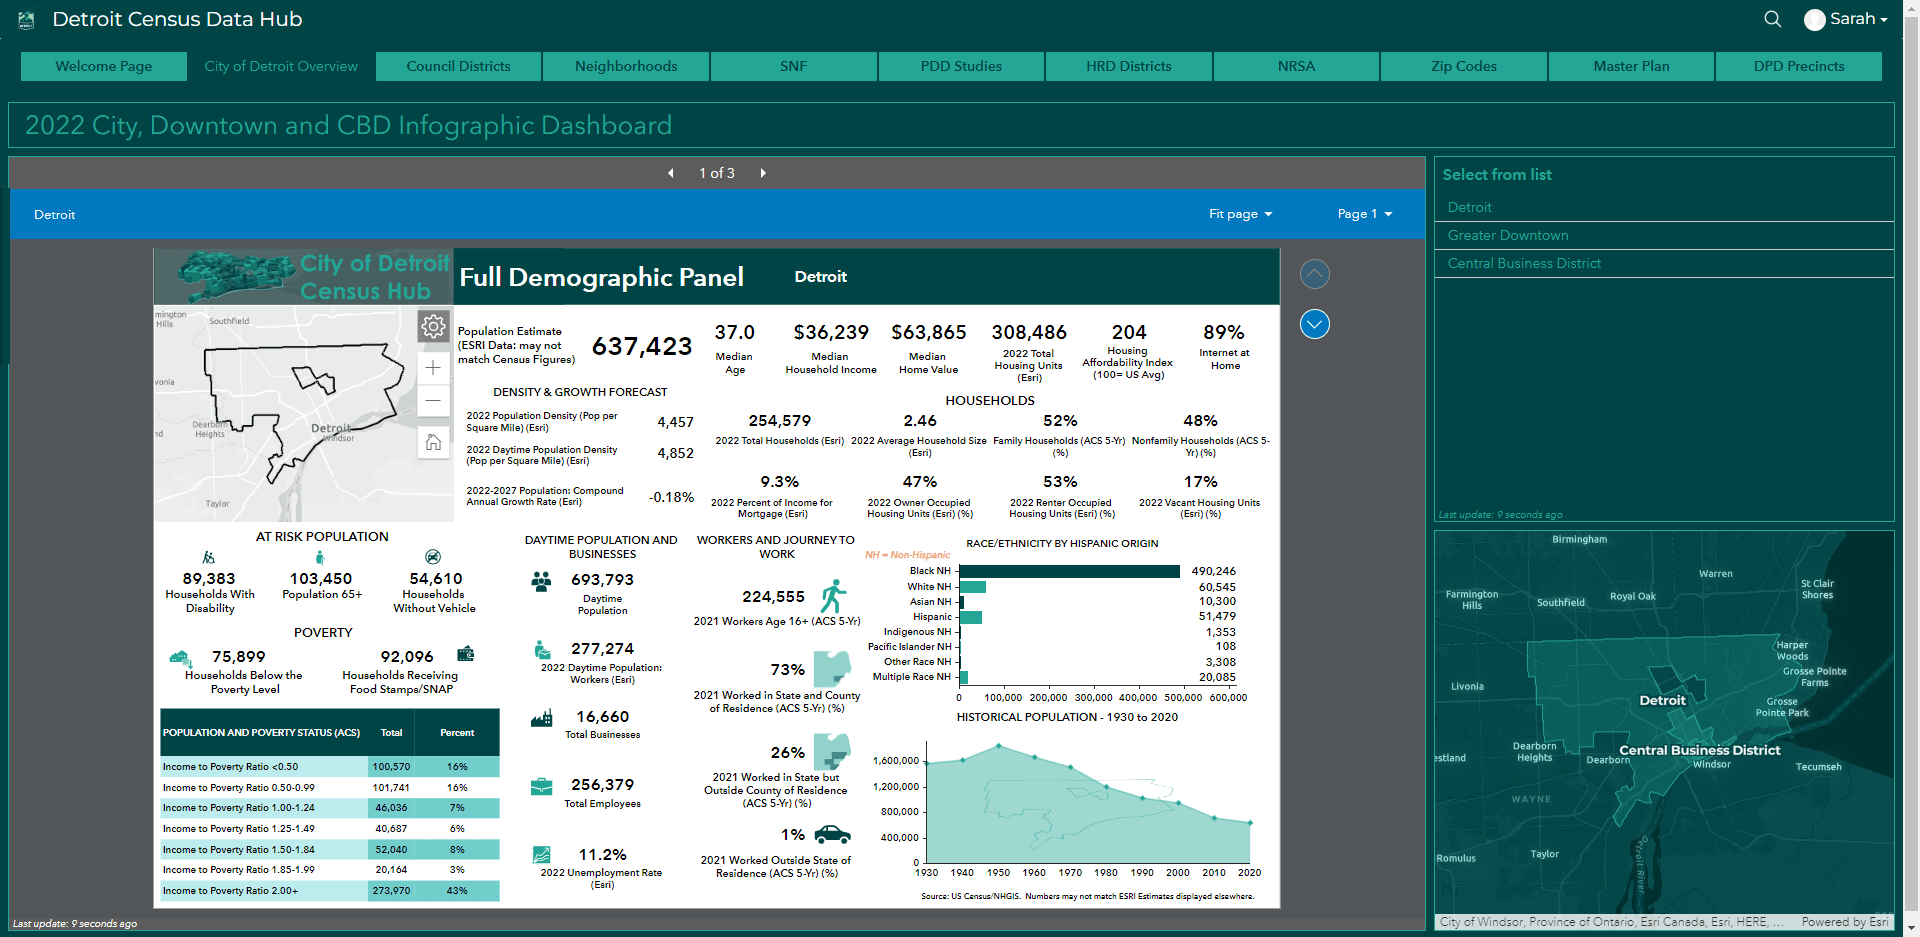 Detroit Census Data Hub infographic and dashboard